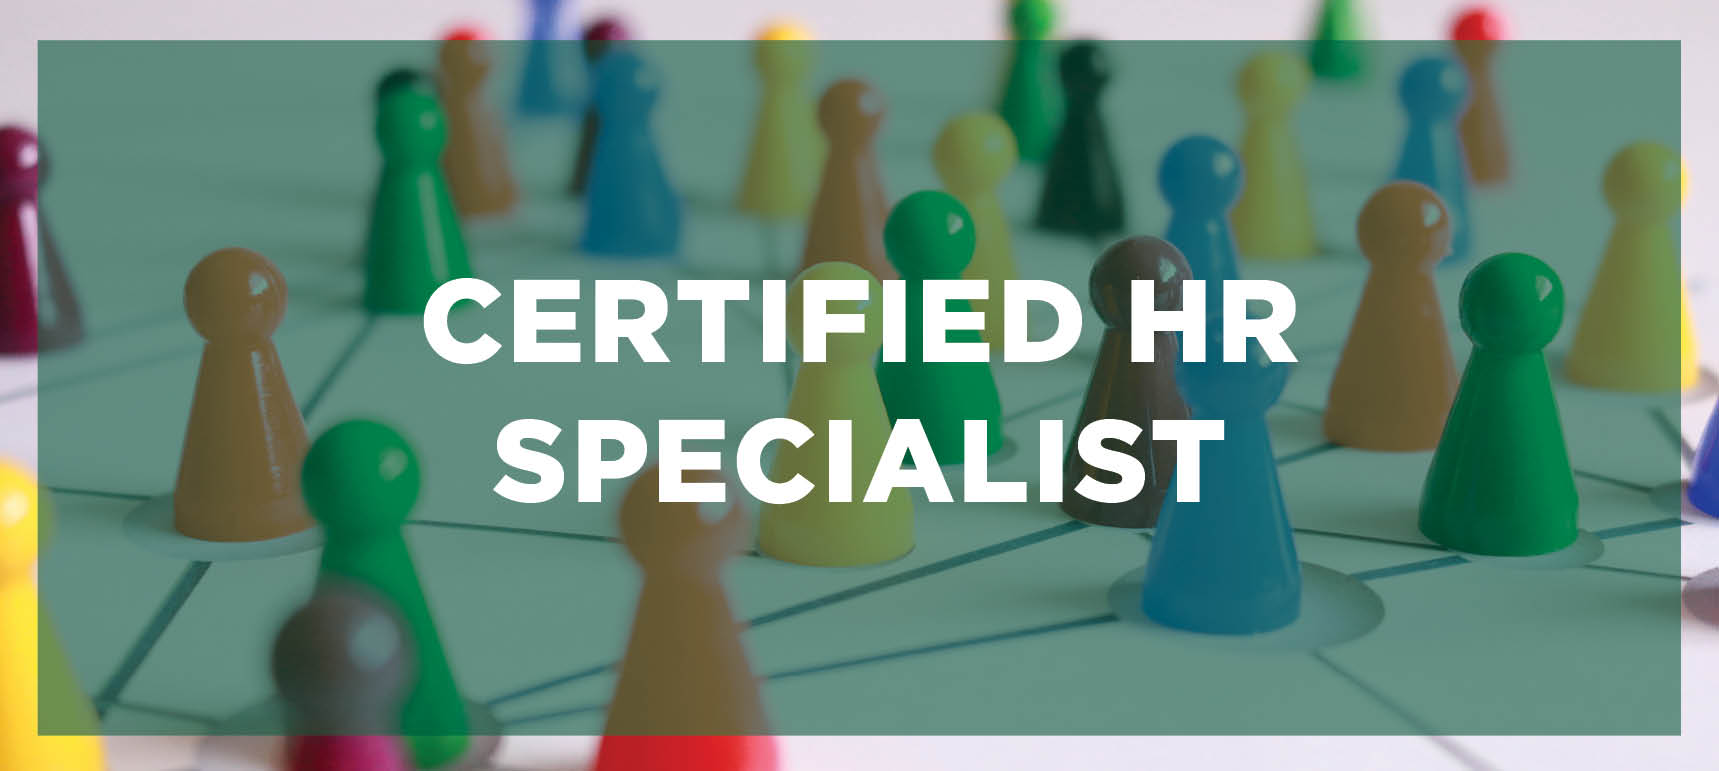 Learn more about the Certified HR Specialist program